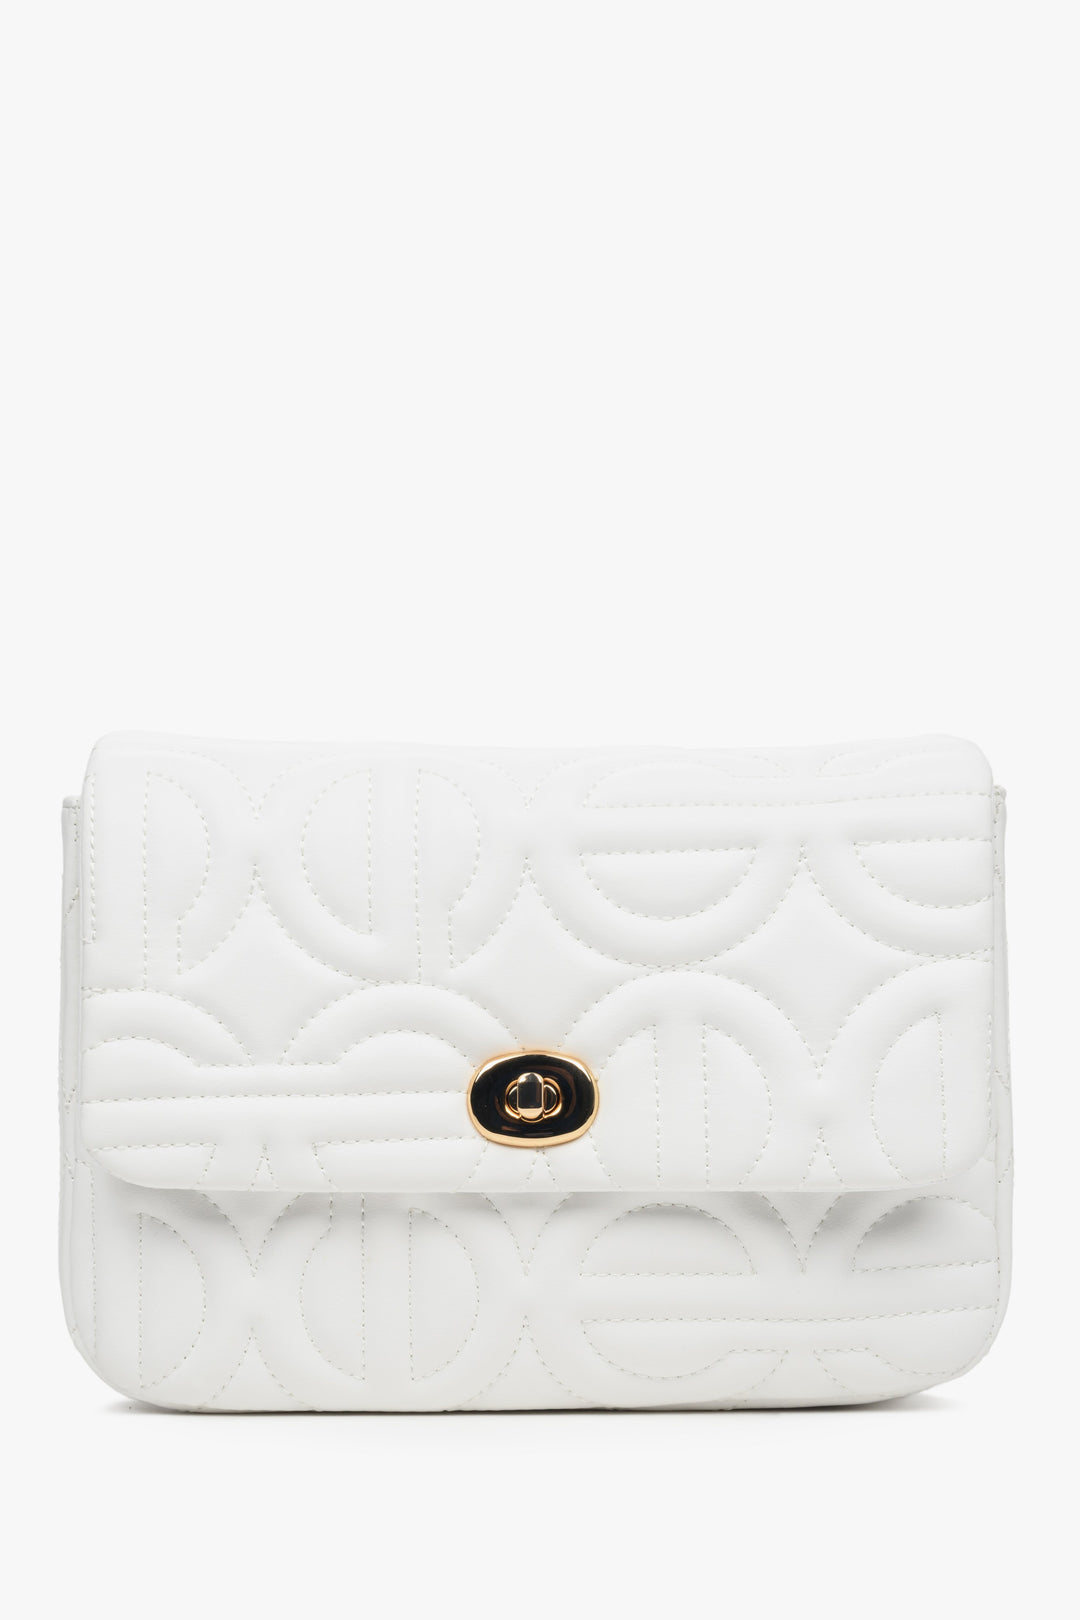 Women's small white  shoulder bag with a gold chain.